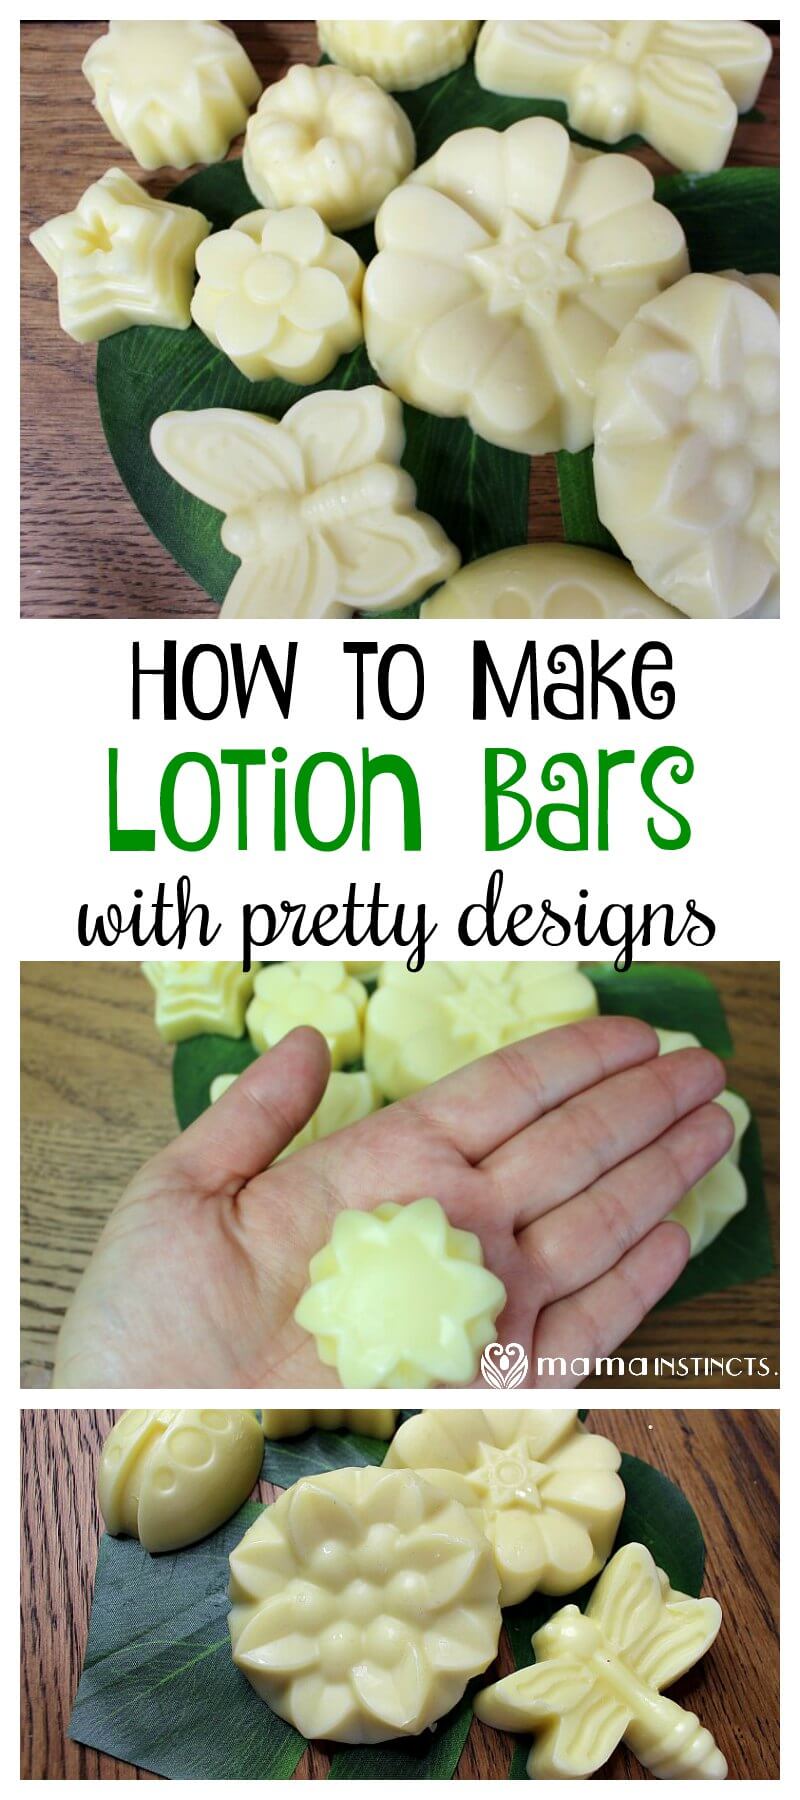 Make beautiful lotion bars with organic ingredients that will melt when they come in contact with your skin to nourish your body. #DIY #DIYbeauty 